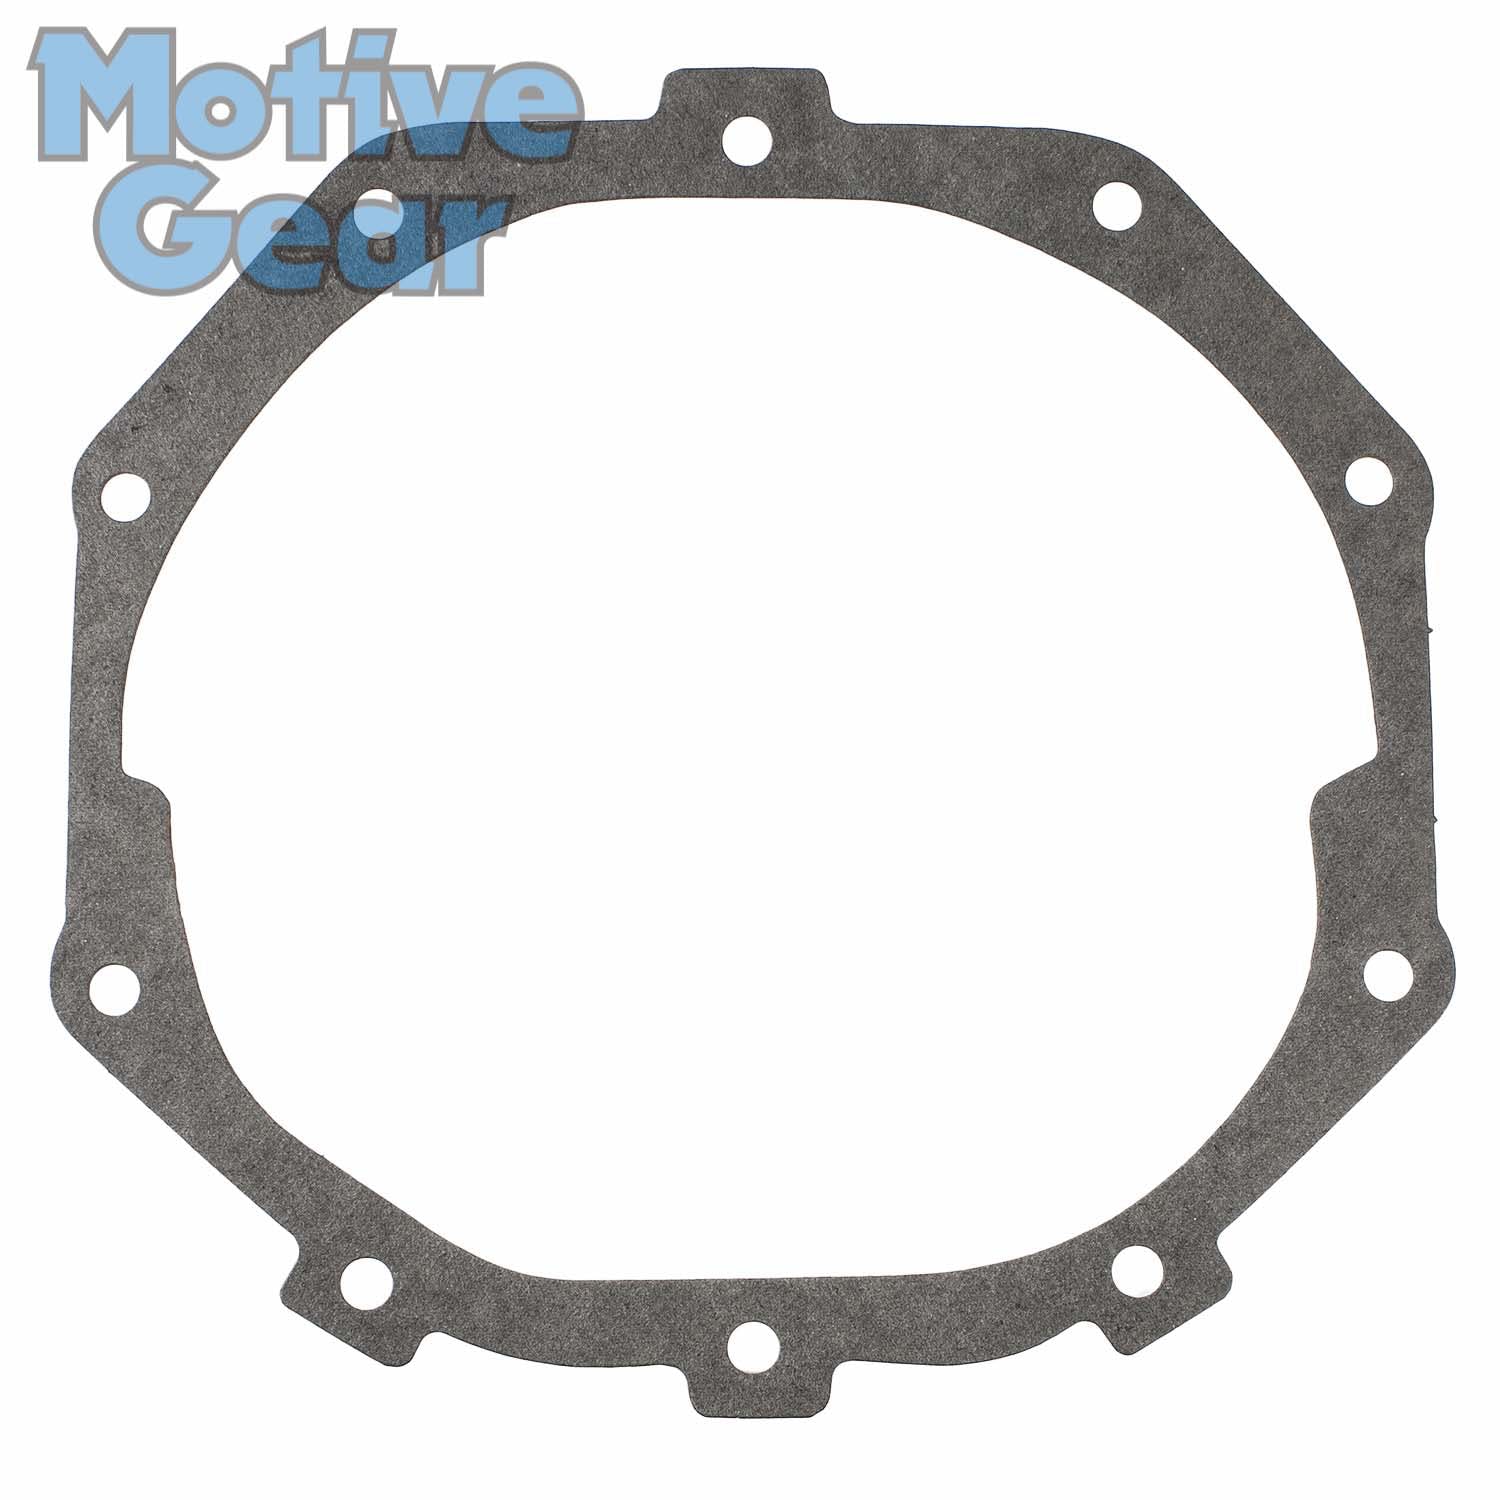 Motive Gear 5127 Differential Cover Gasket